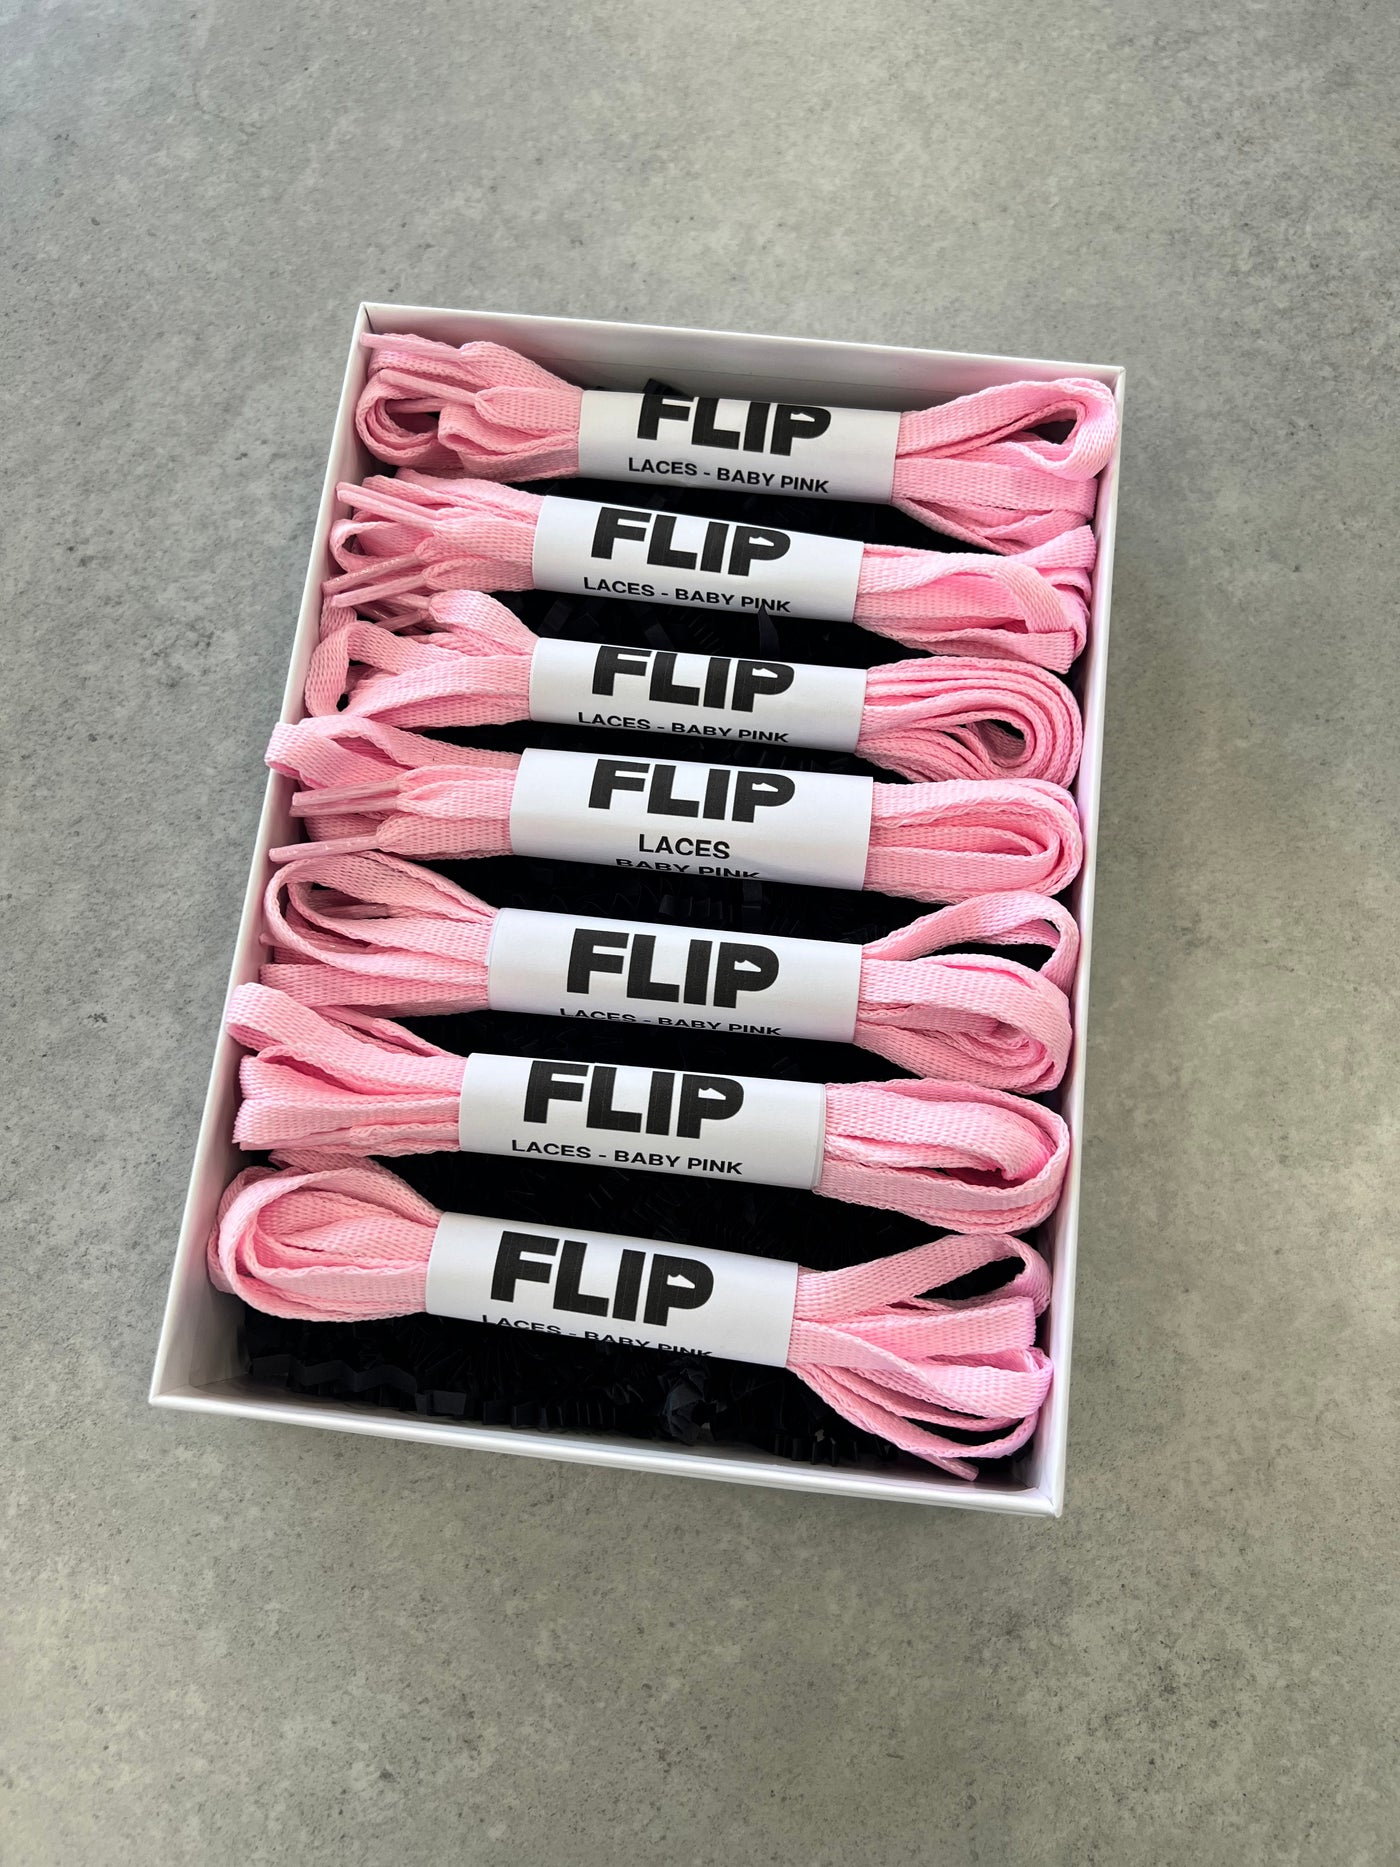 FLIP Laces - Baby Pink